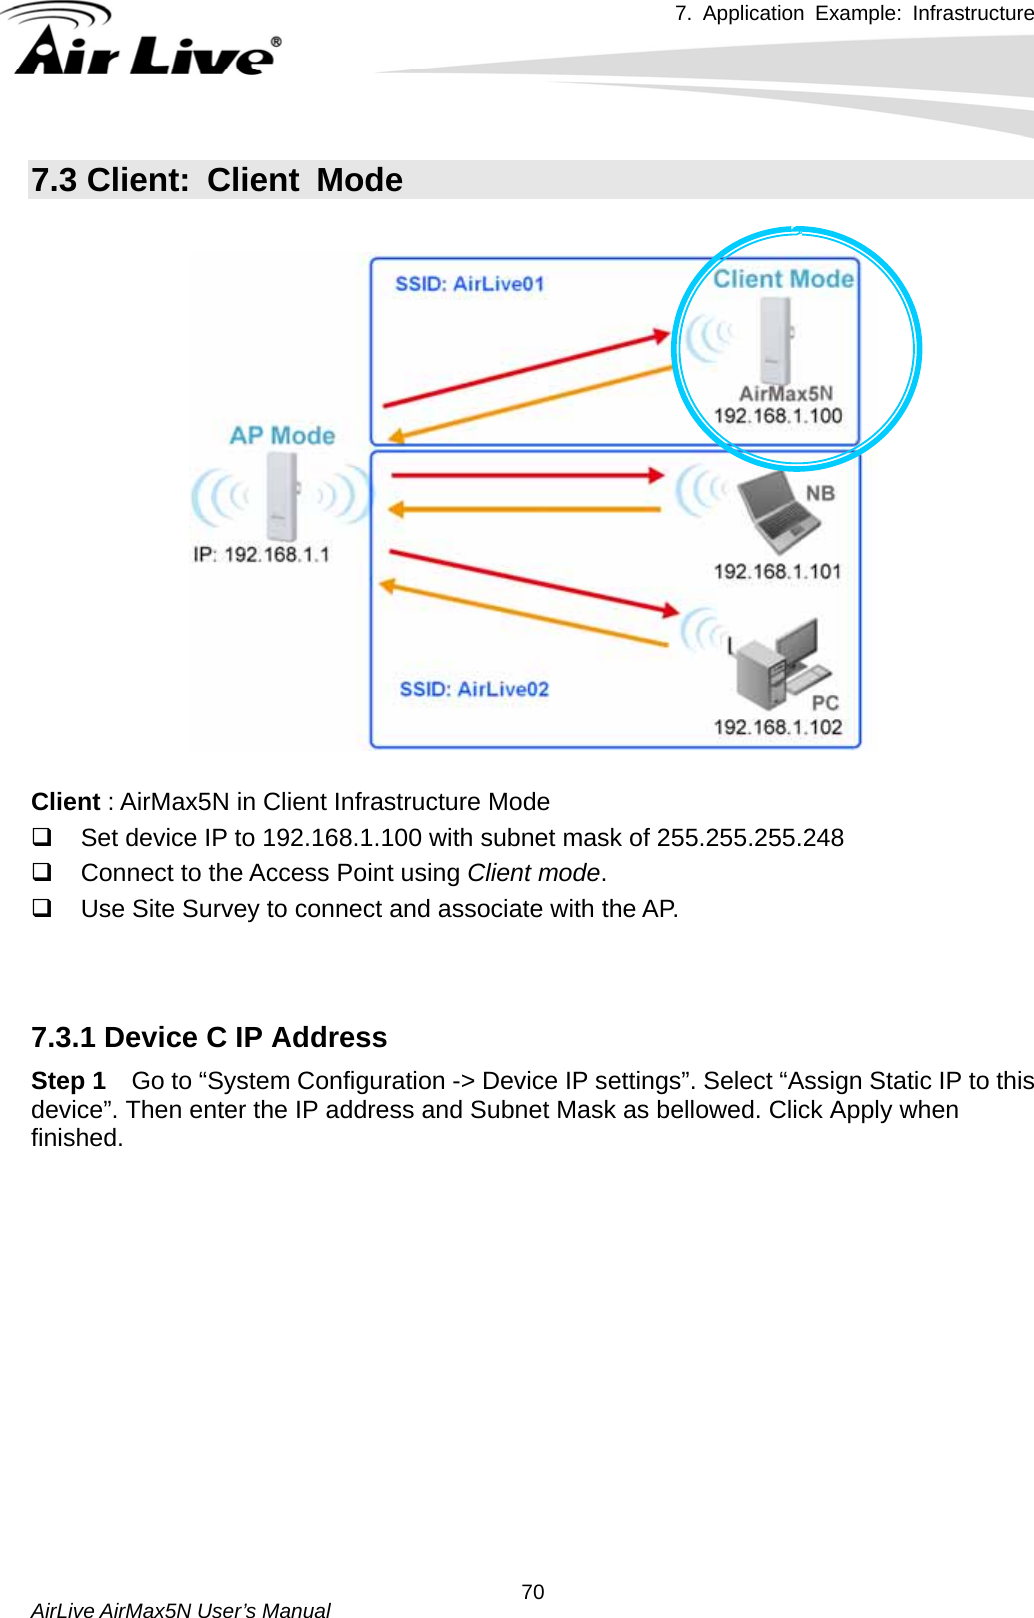 7. Application Example: Infrastructure    AirLive AirMax5N User’s Manual  707.3 Client: Client Mode    Client : AirMax5N in Client Infrastructure Mode   Set device IP to 192.168.1.100 with subnet mask of 255.255.255.248   Connect to the Access Point using Client mode.   Use Site Survey to connect and associate with the AP.   7.3.1 Device C IP Address Step 1  Go to “System Configuration -&gt; Device IP settings”. Select “Assign Static IP to this device”. Then enter the IP address and Subnet Mask as bellowed. Click Apply when finished. 